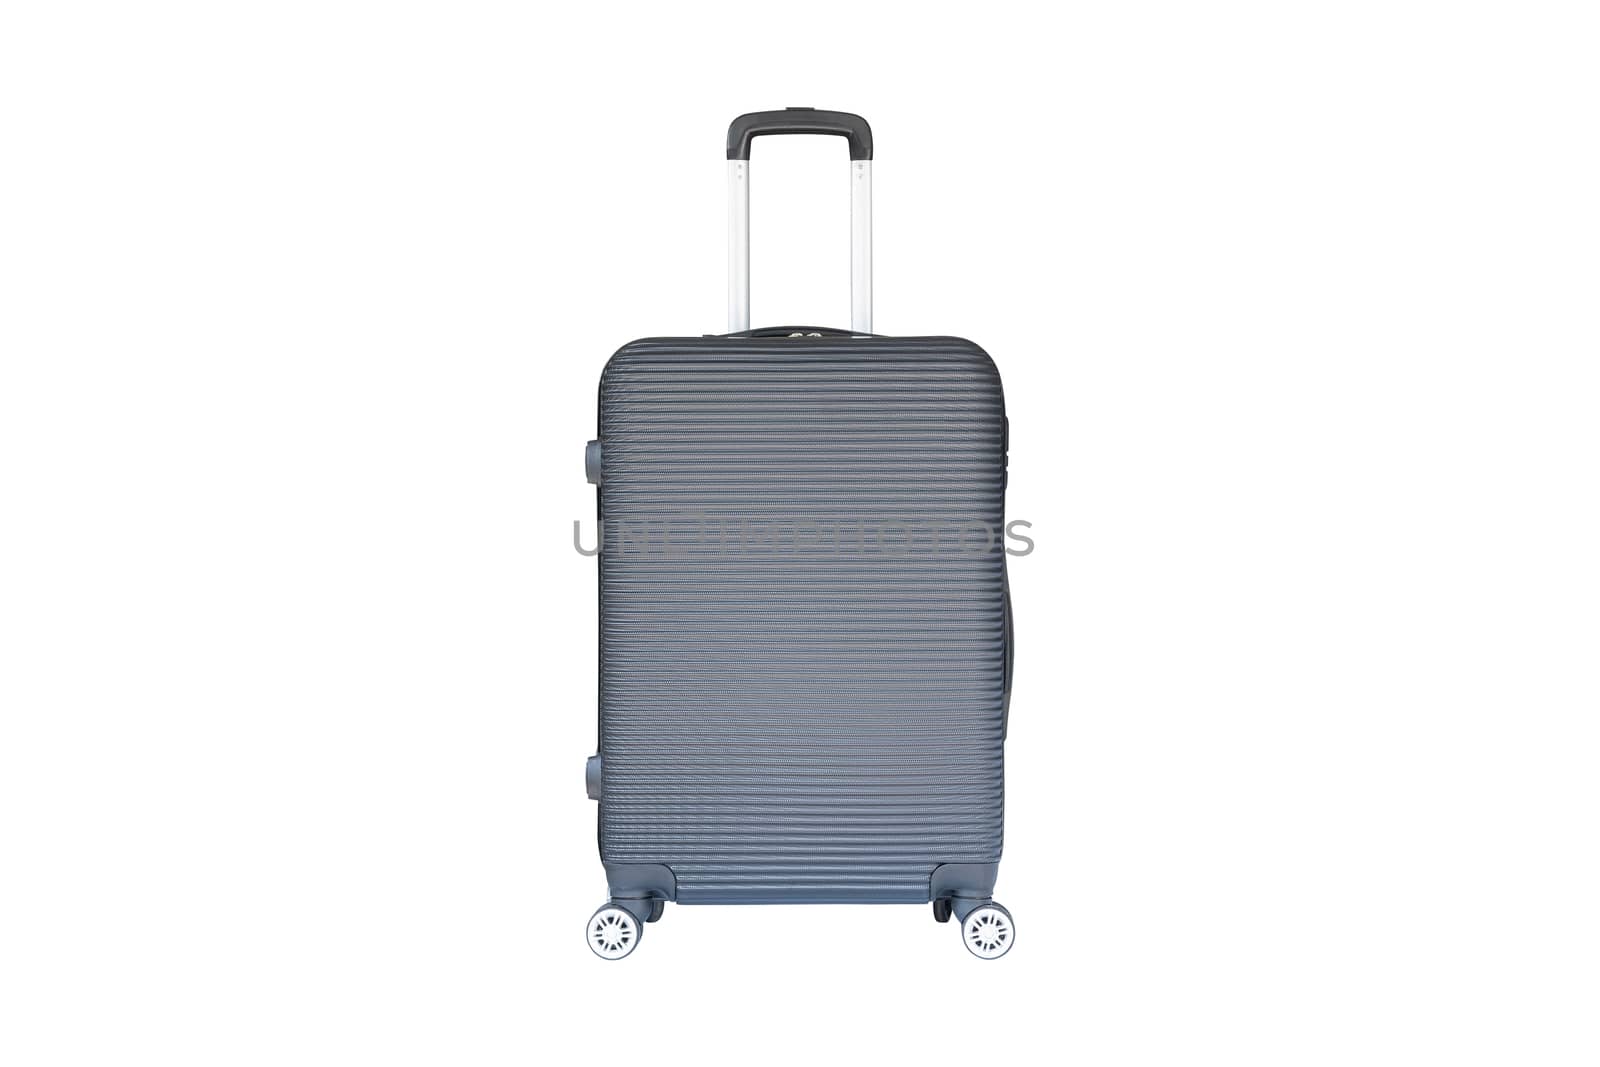 Beautiful gray color travel luggage isolated on white background.